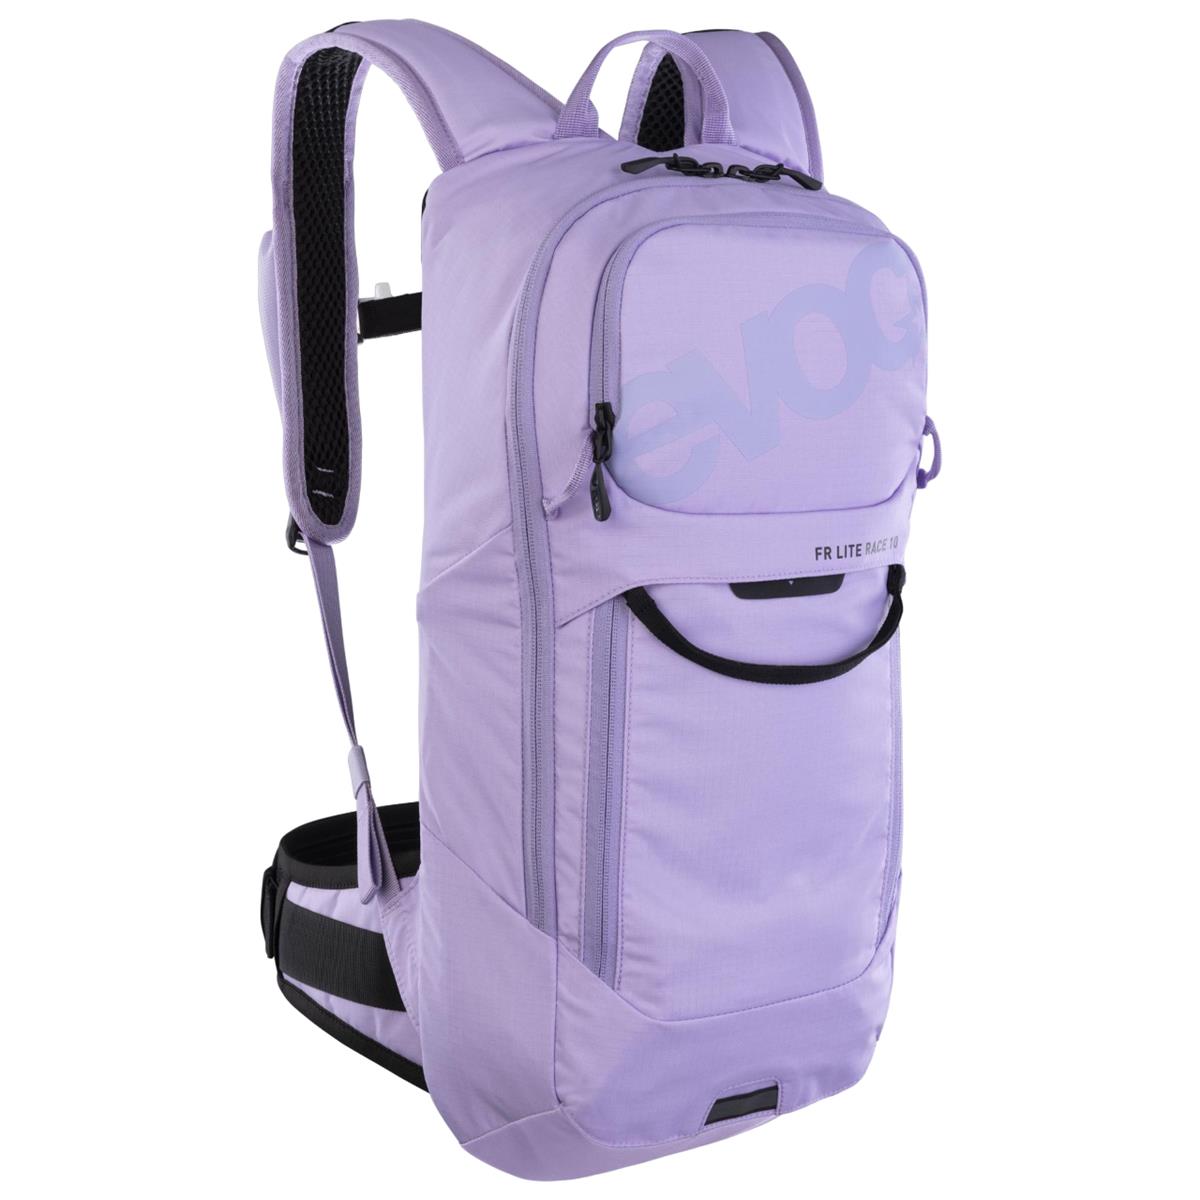 FR LITE RACE 10 Backpack With Back Protector 10L Purple Size S